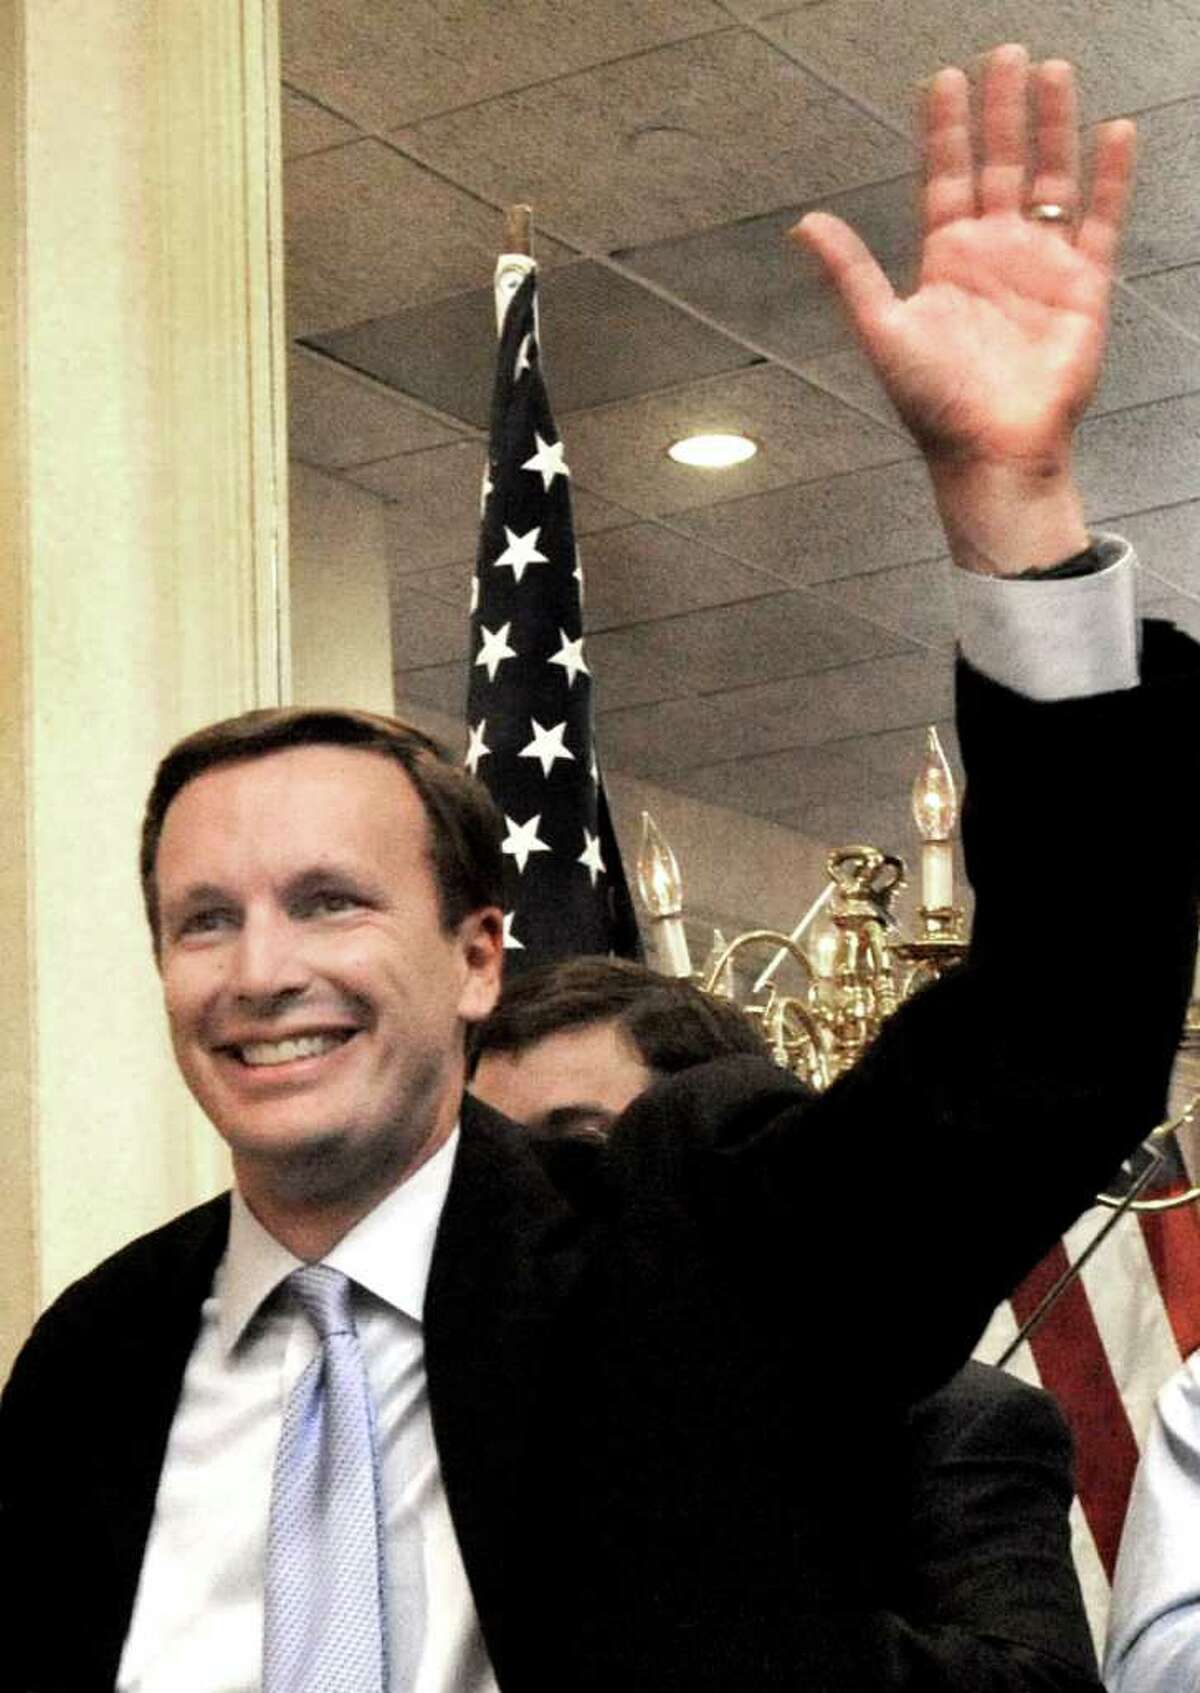 Chris Murphy announces victory at his Waterbury Headquaters on election night, Tuesday, Nov. 2, 2010. On Monday he said he is considering running for Joe Liberman's Senate seat.